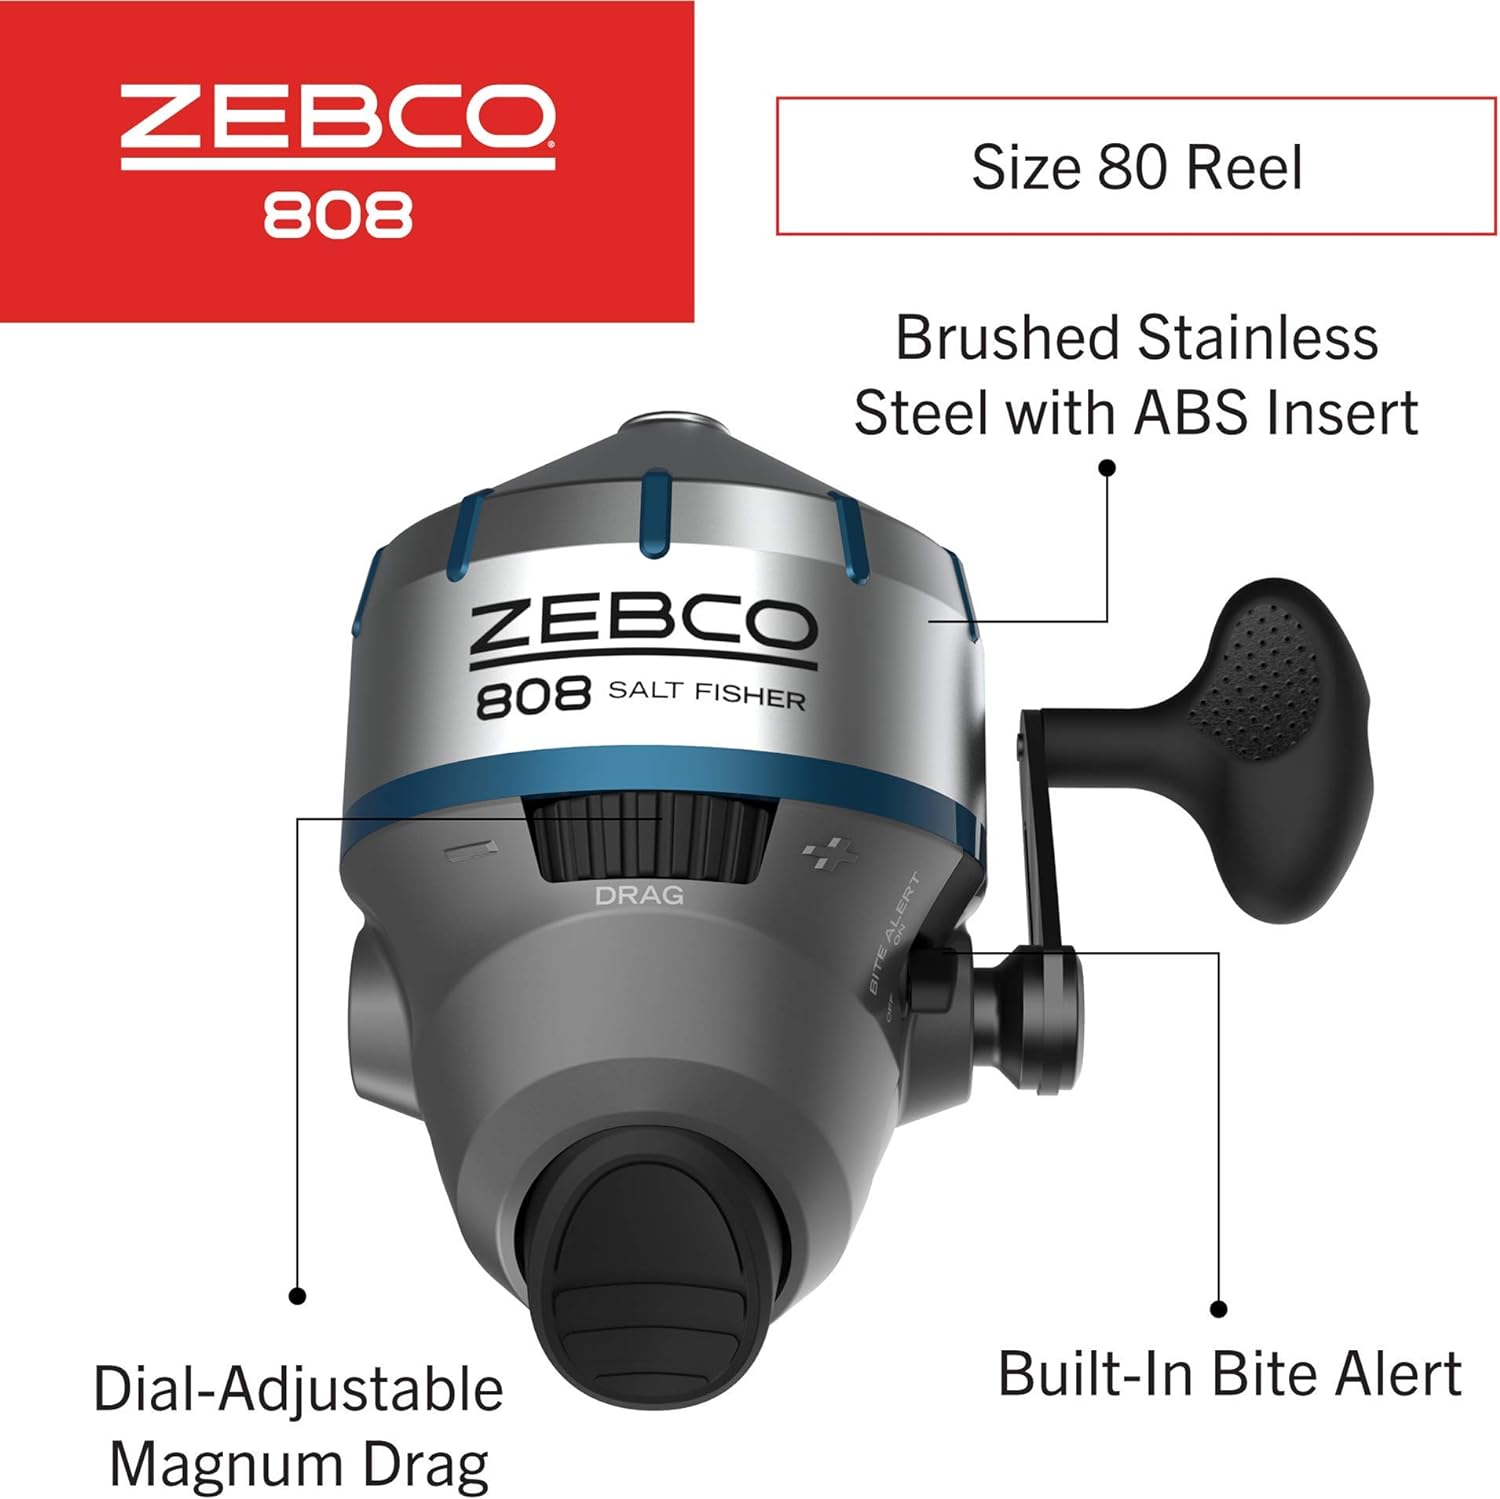 Zebco 808 Saltwater Spincast Fishing Reel, Stainless Steel Reel Cover with ABS Insert, Quickset Anti-Reverse and Bite Alert, Pre-spooled with 20-Pound Fishing Line, Size 80, Silver